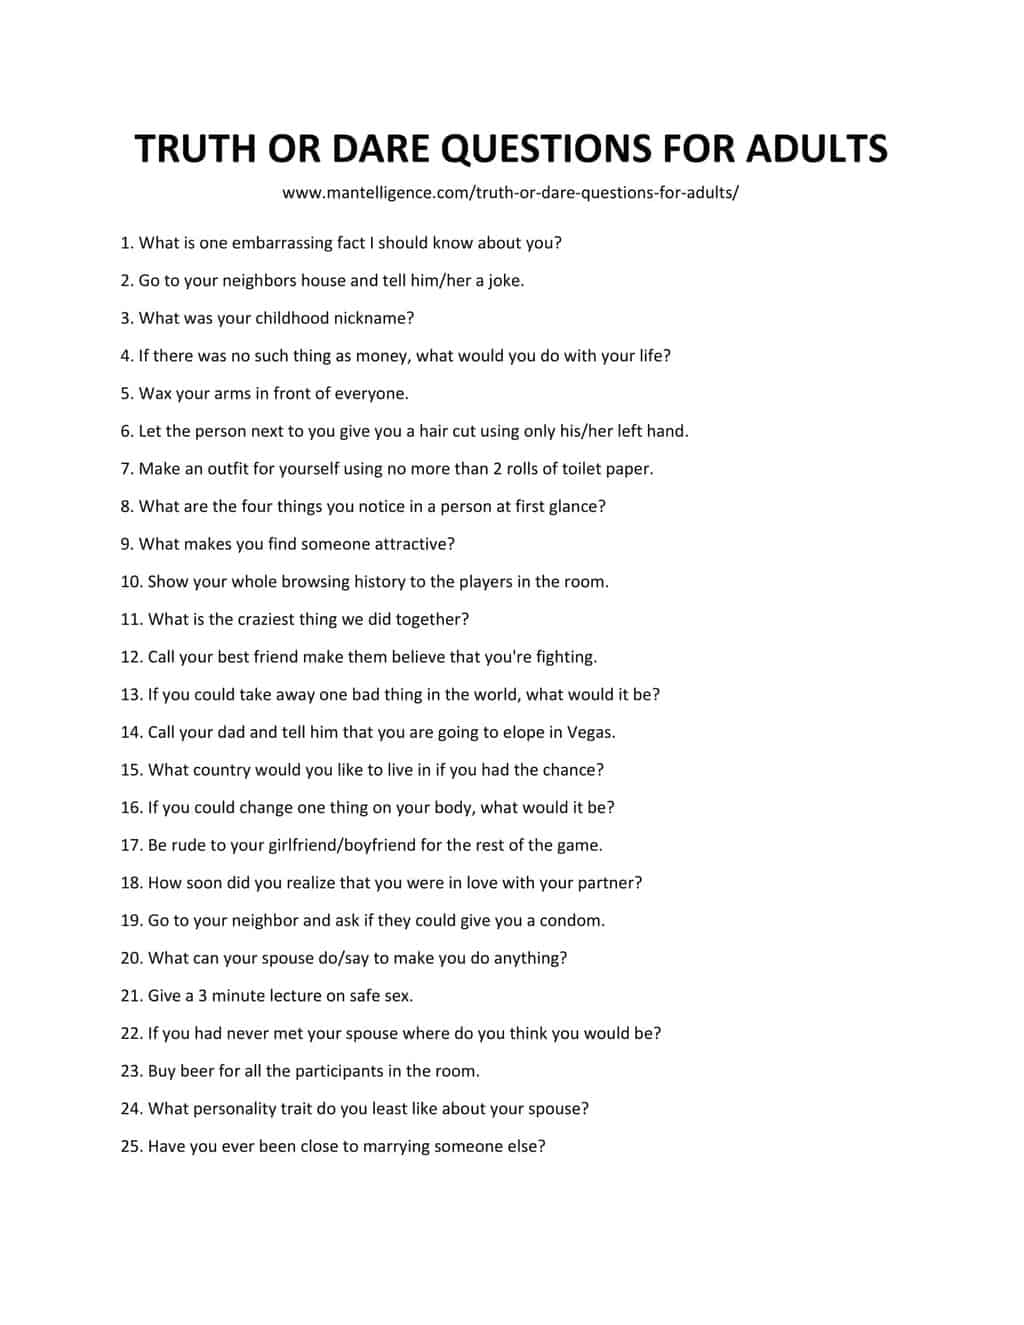 samples of questions adult dare truth or